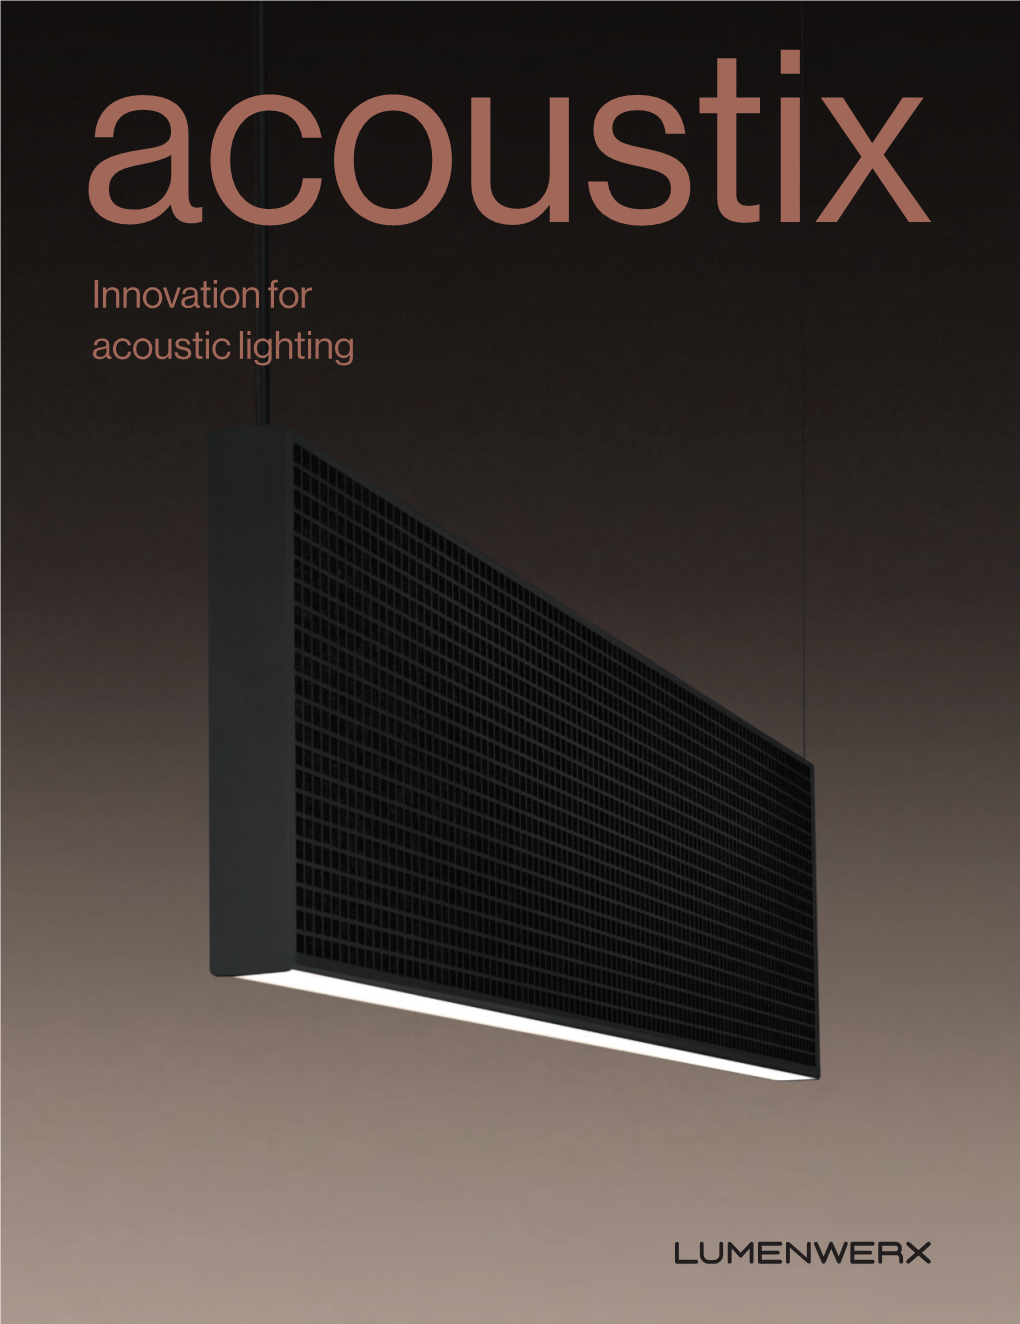 Innovation for Acoustic Lighting Introducing Acoustix